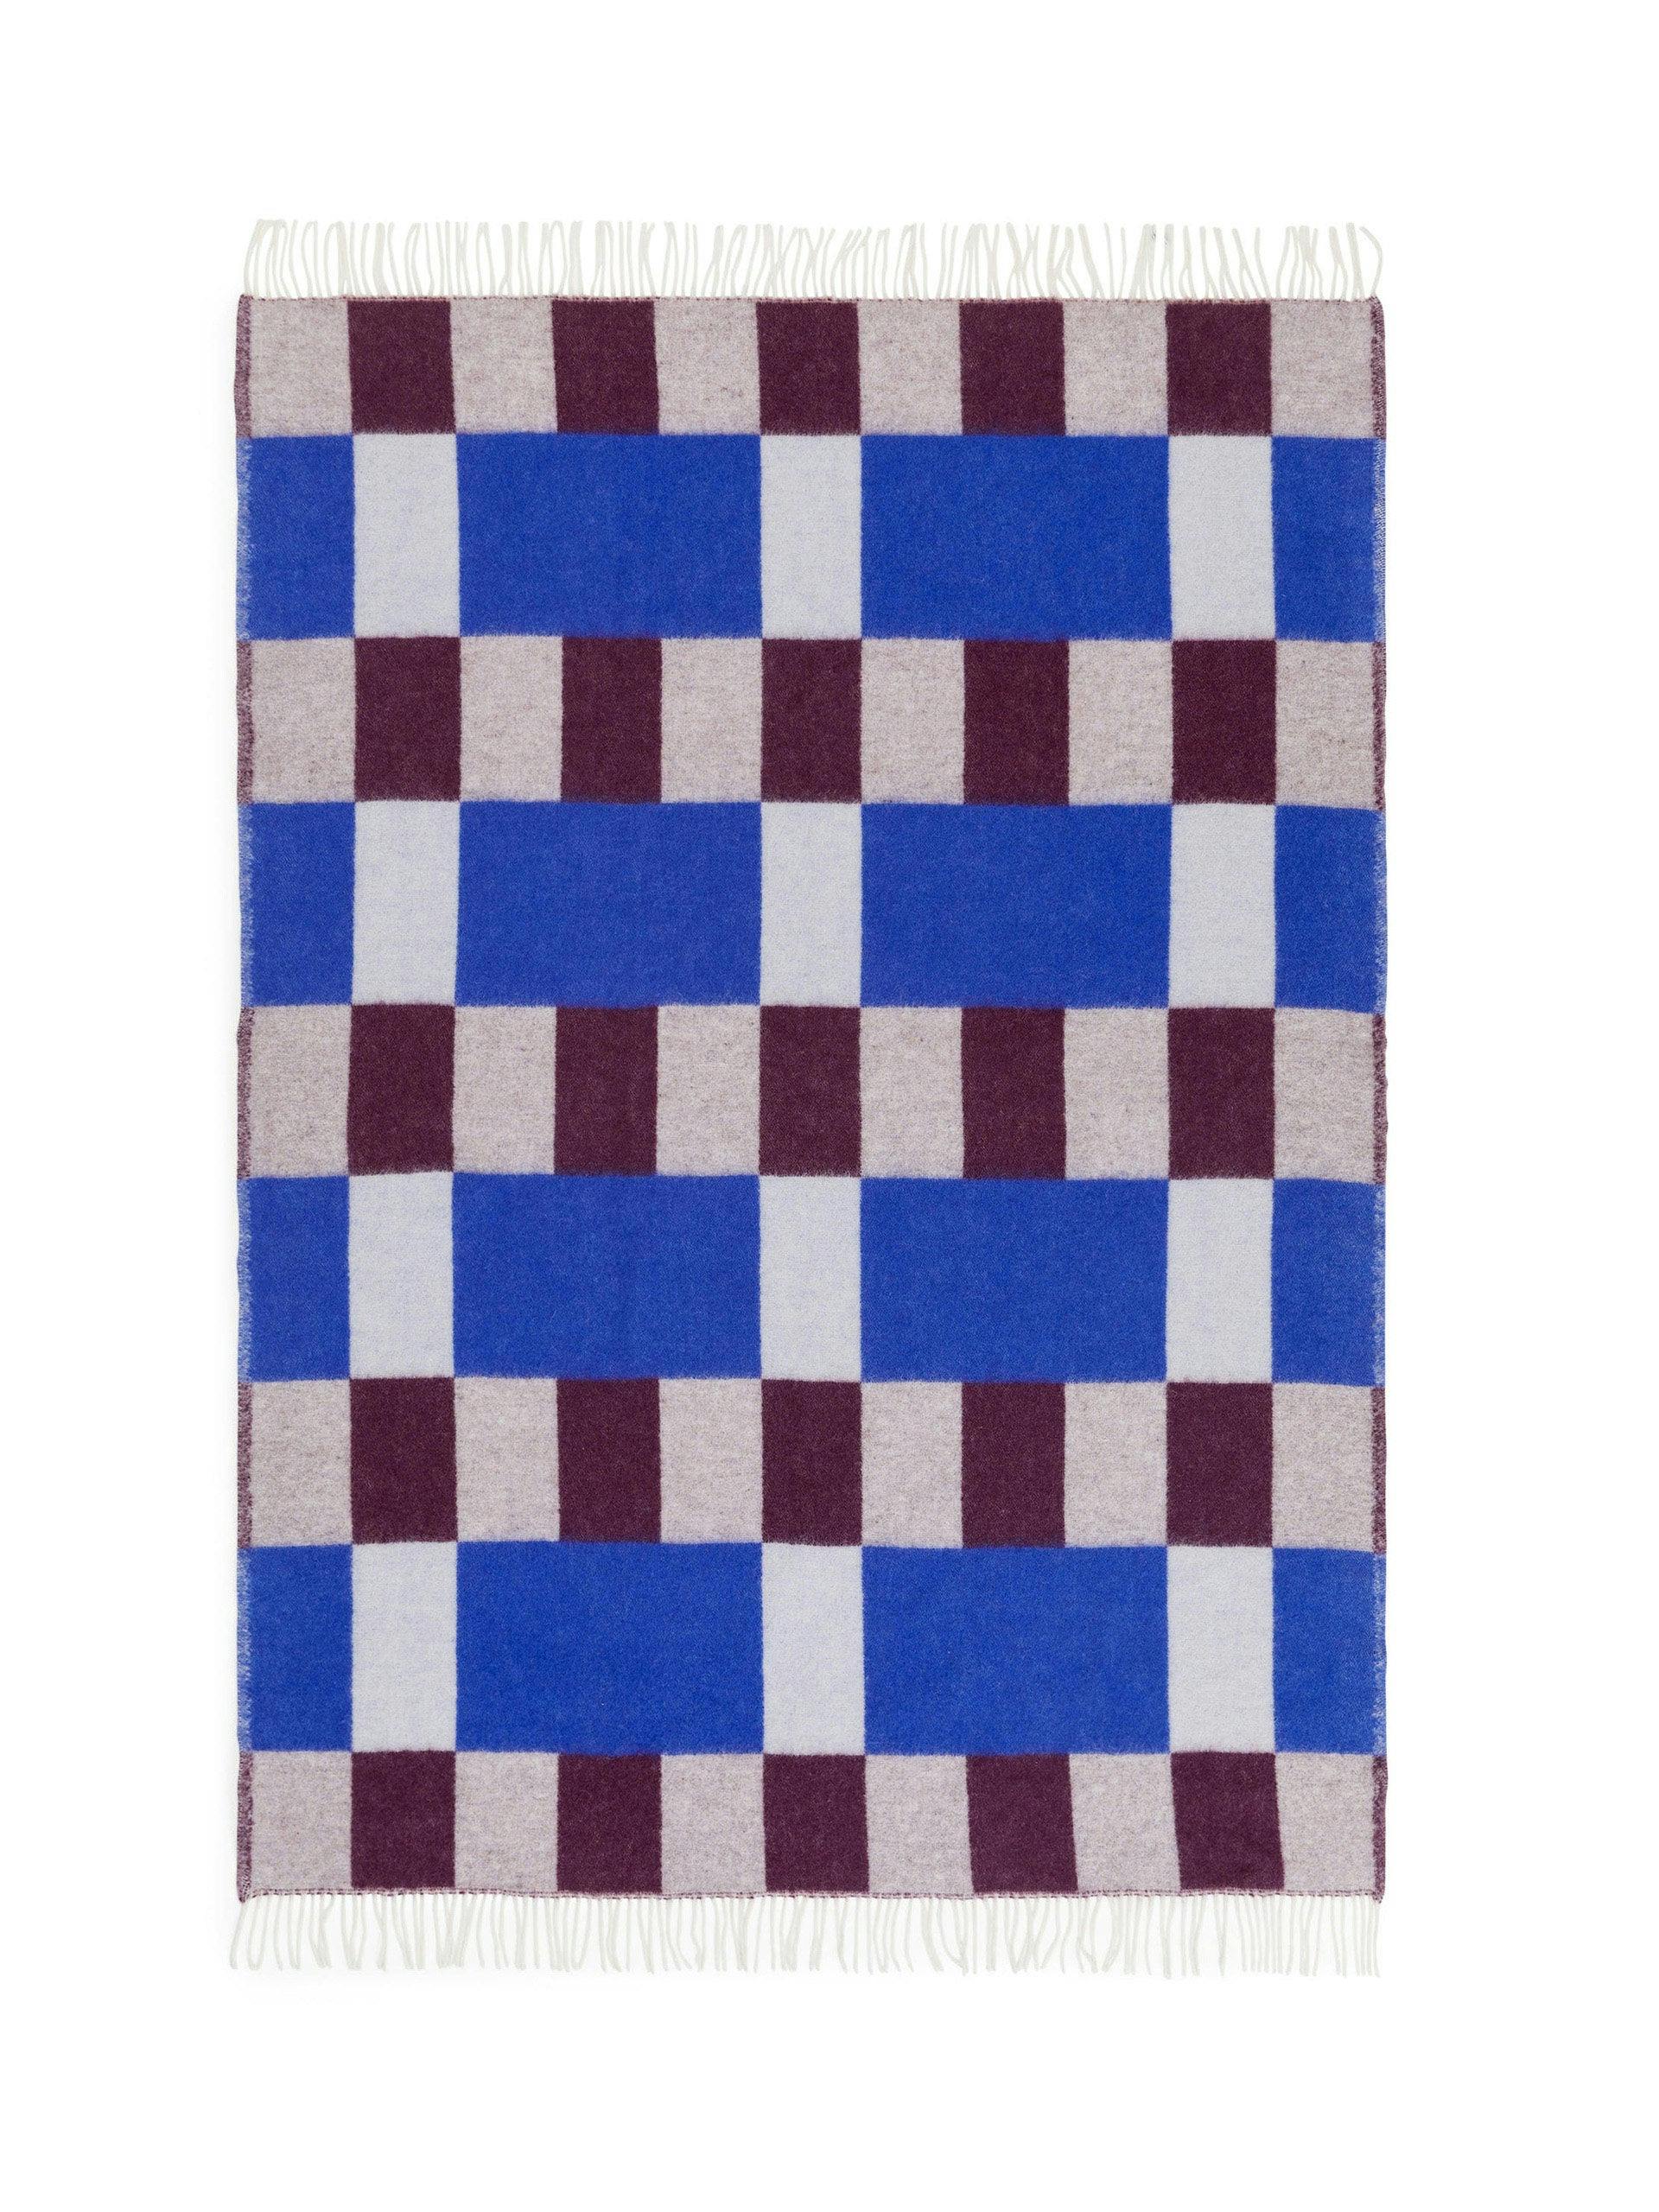 Blue and purple checked lambswool blanket